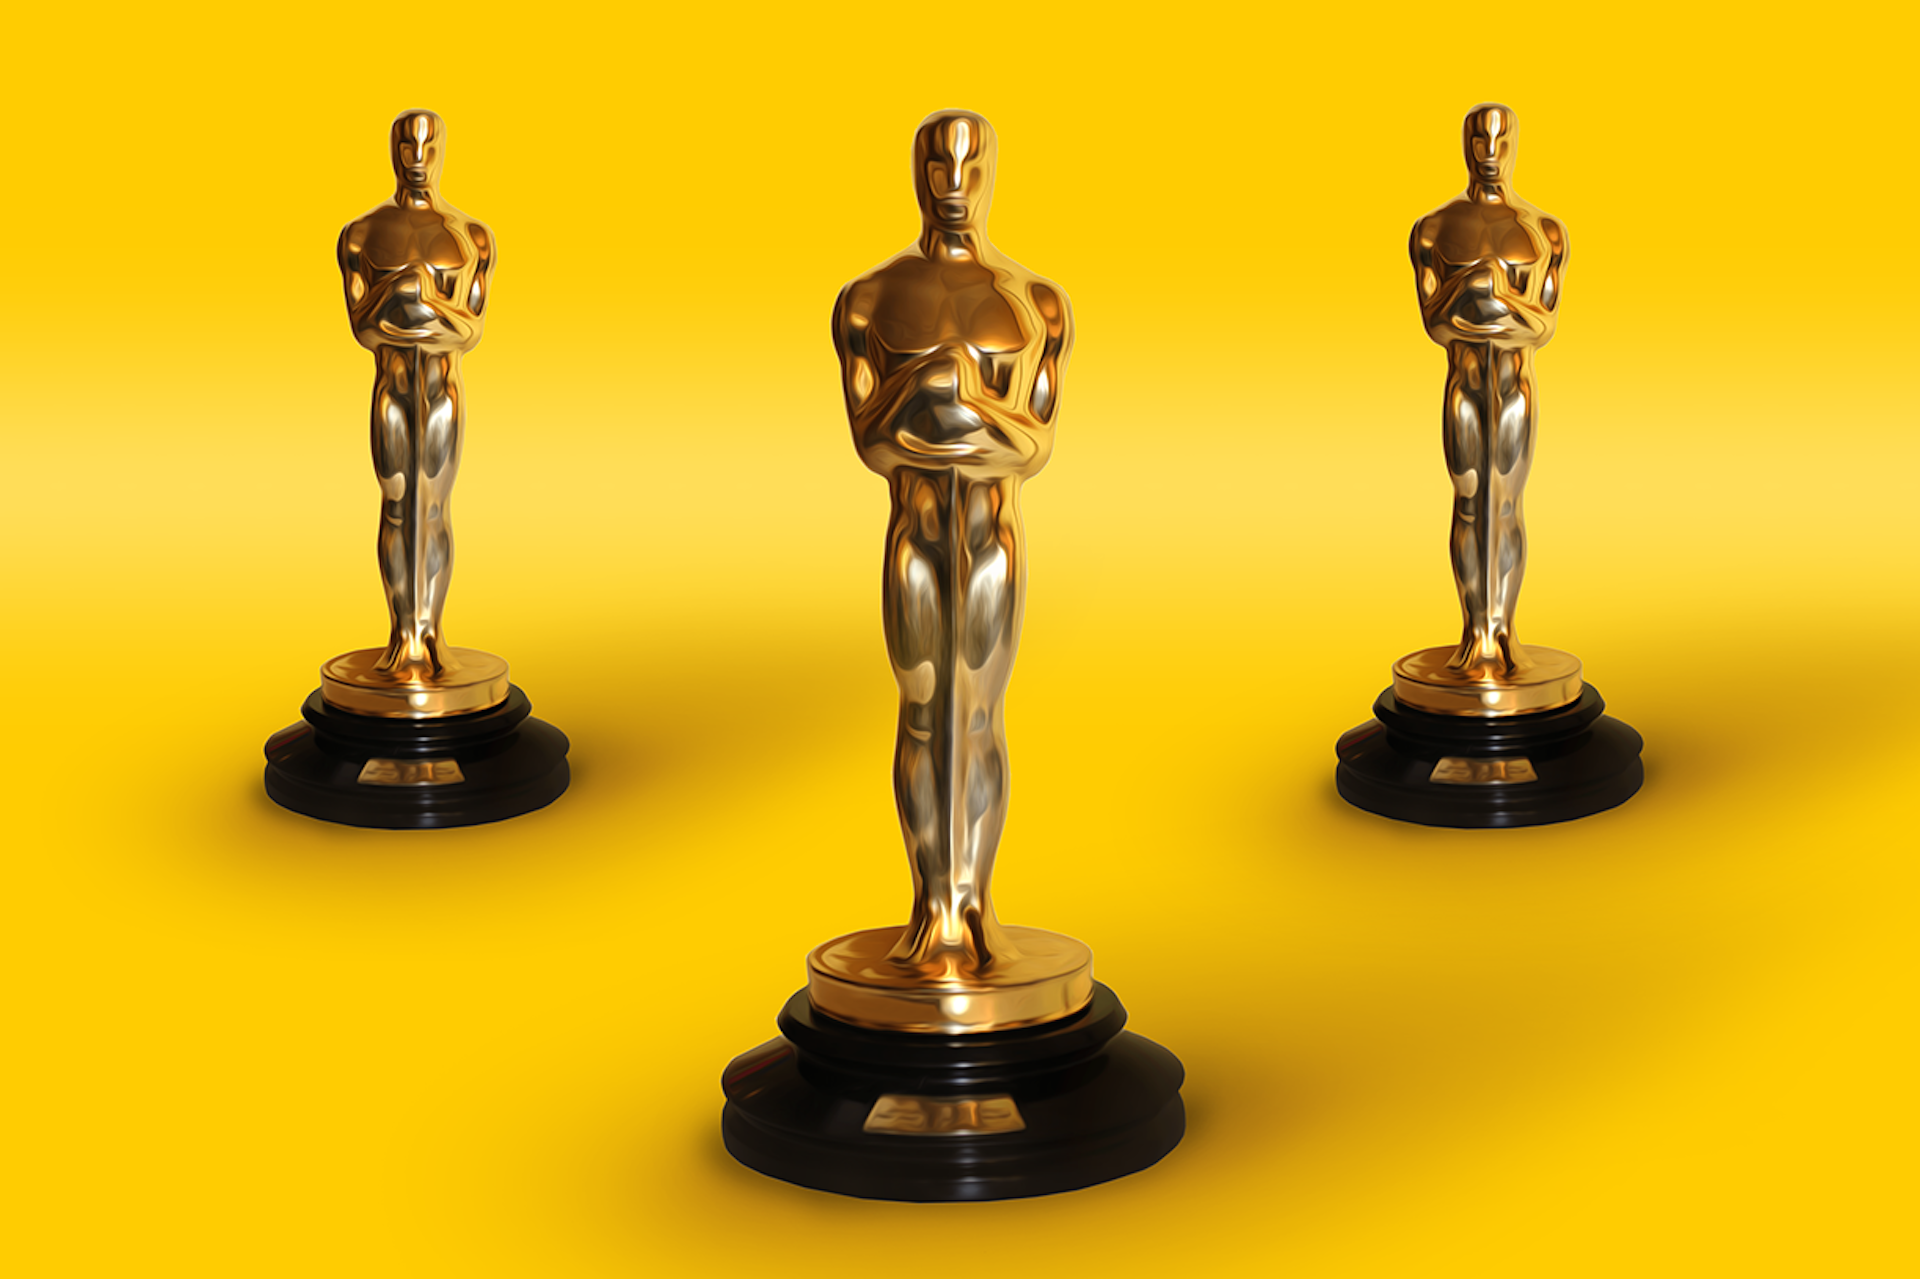 Three Oscar Award statuettes stand against a gold background in this image for a Meltwater Social Listening blog about the 96th Academy Awards.